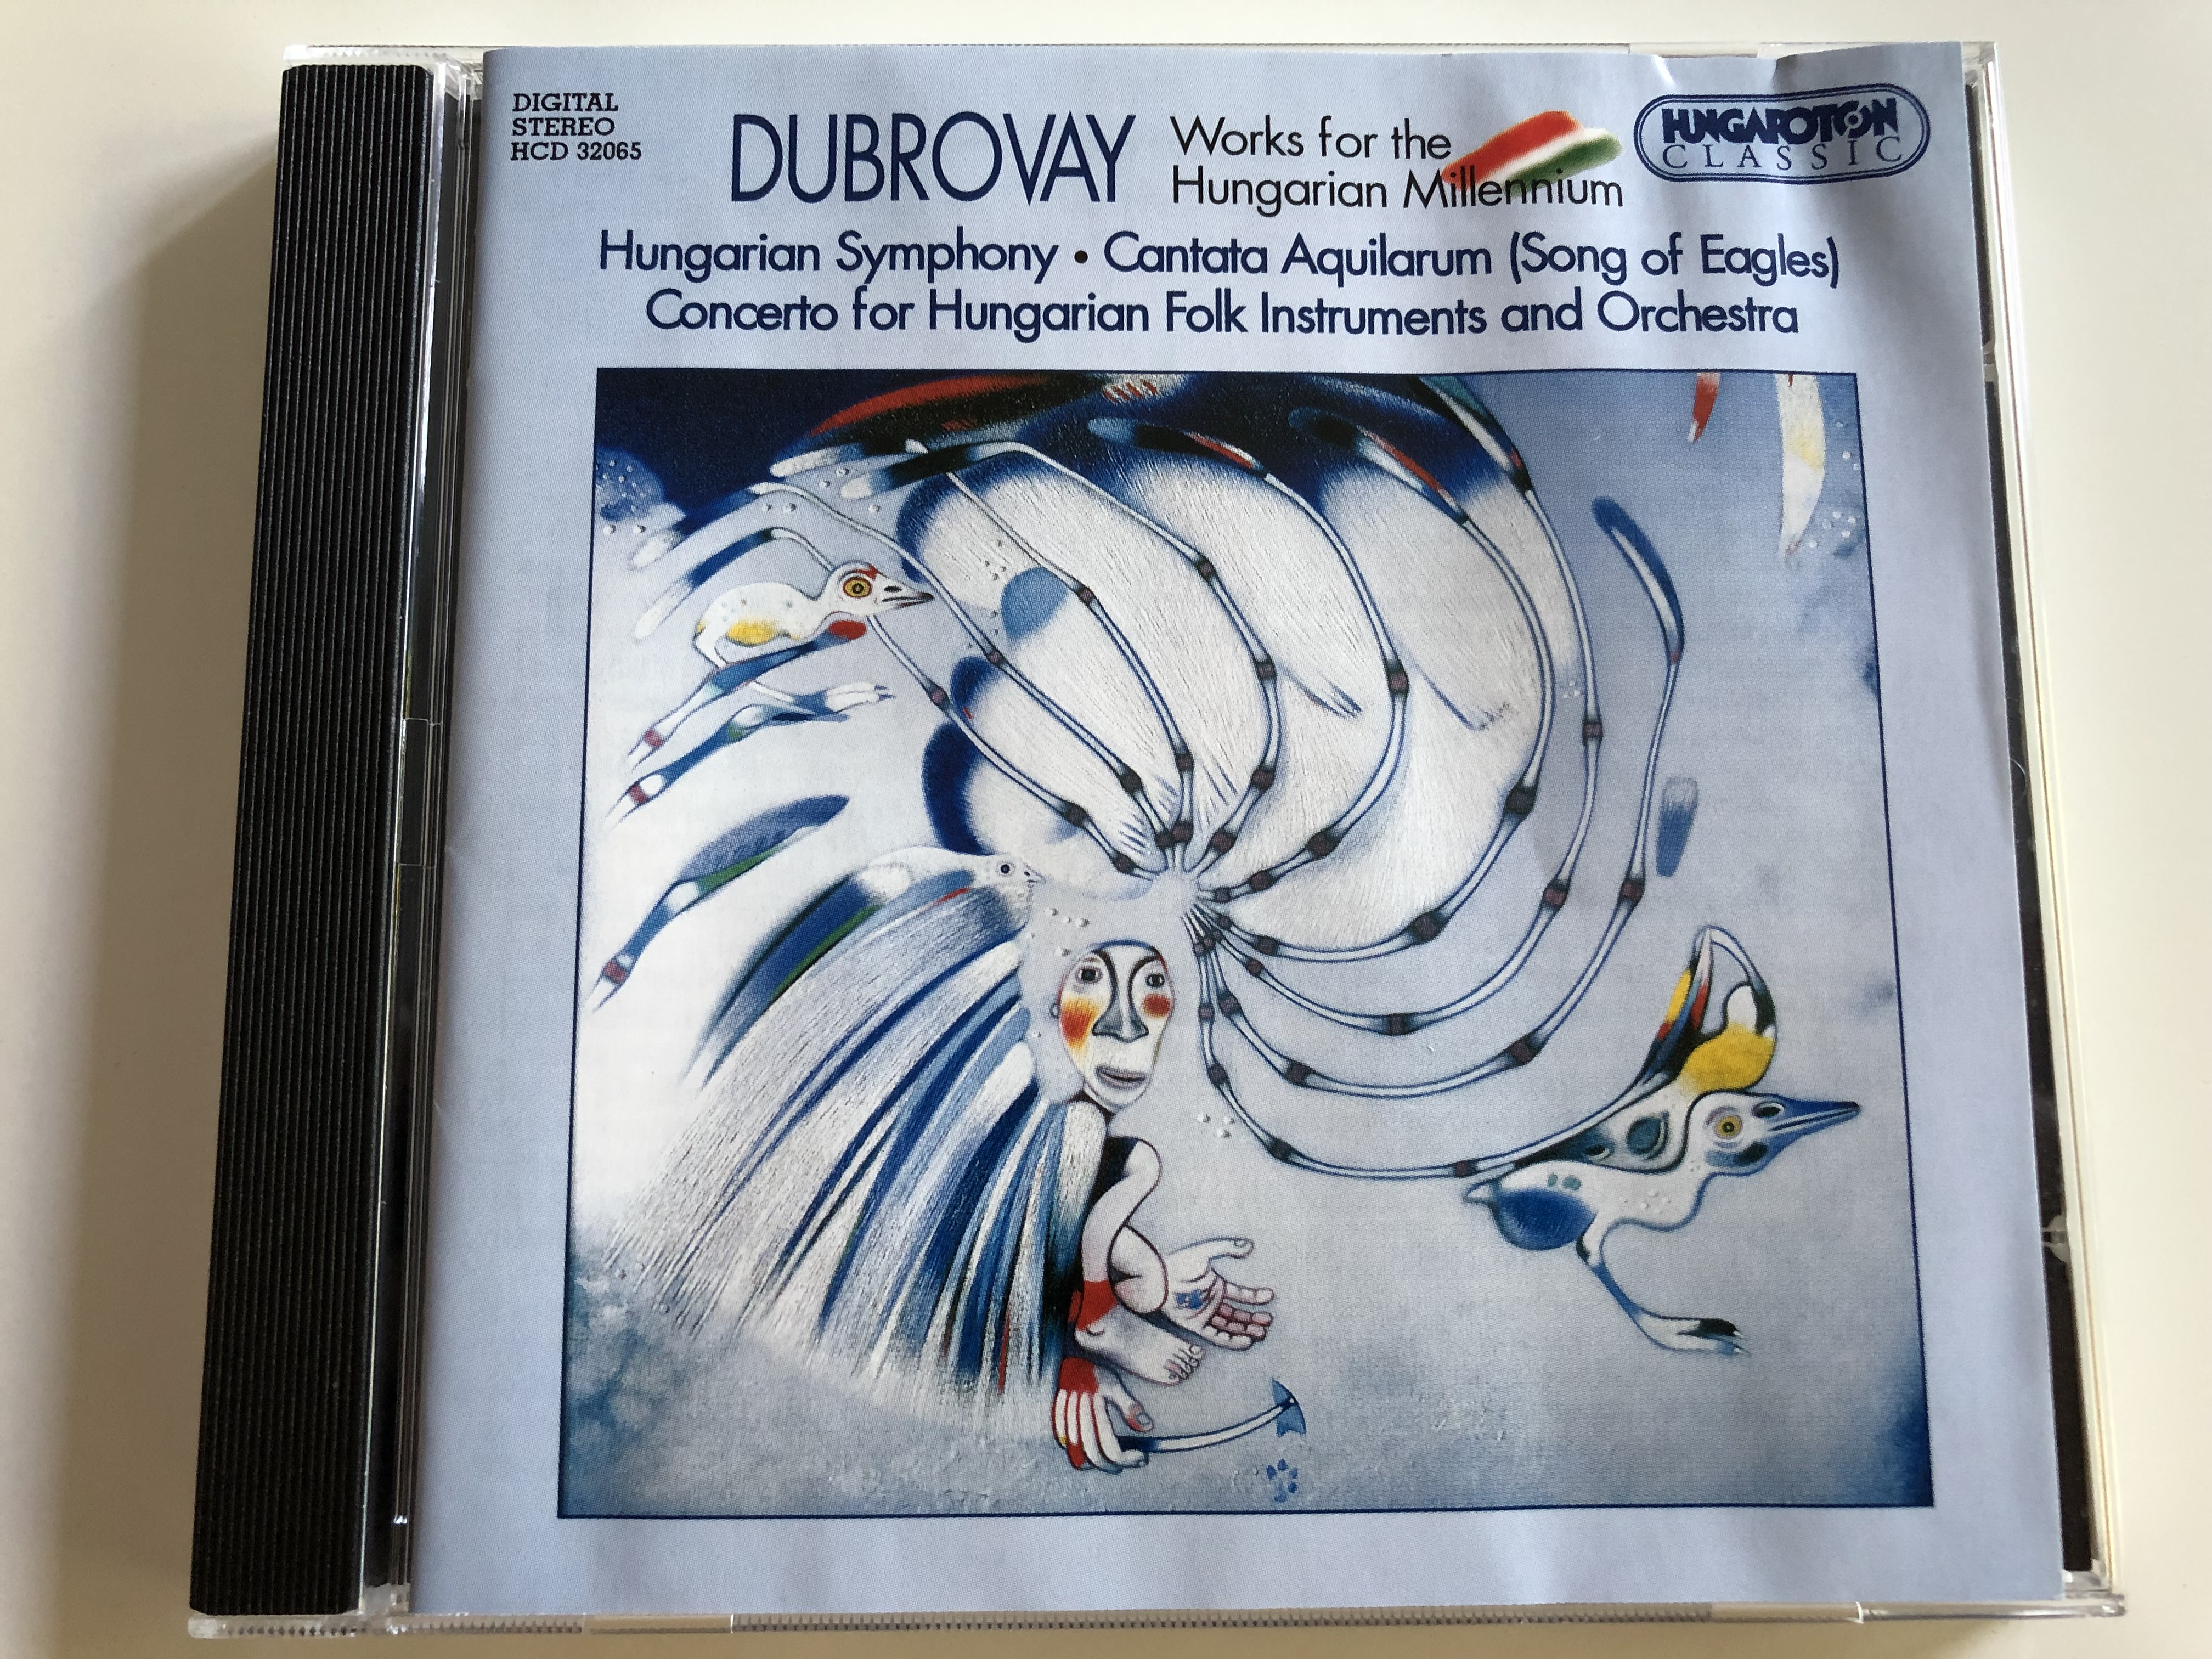 dubrovay-works-for-the-hungarian-millennium-hungarian-symphony-cantata-aquilarum-song-of-eagles-concerto-for-hungarian-folk-instruments-and-orchestra-hungaroton-classic-audio-cd-2001-hcd-32065-1-.jpg